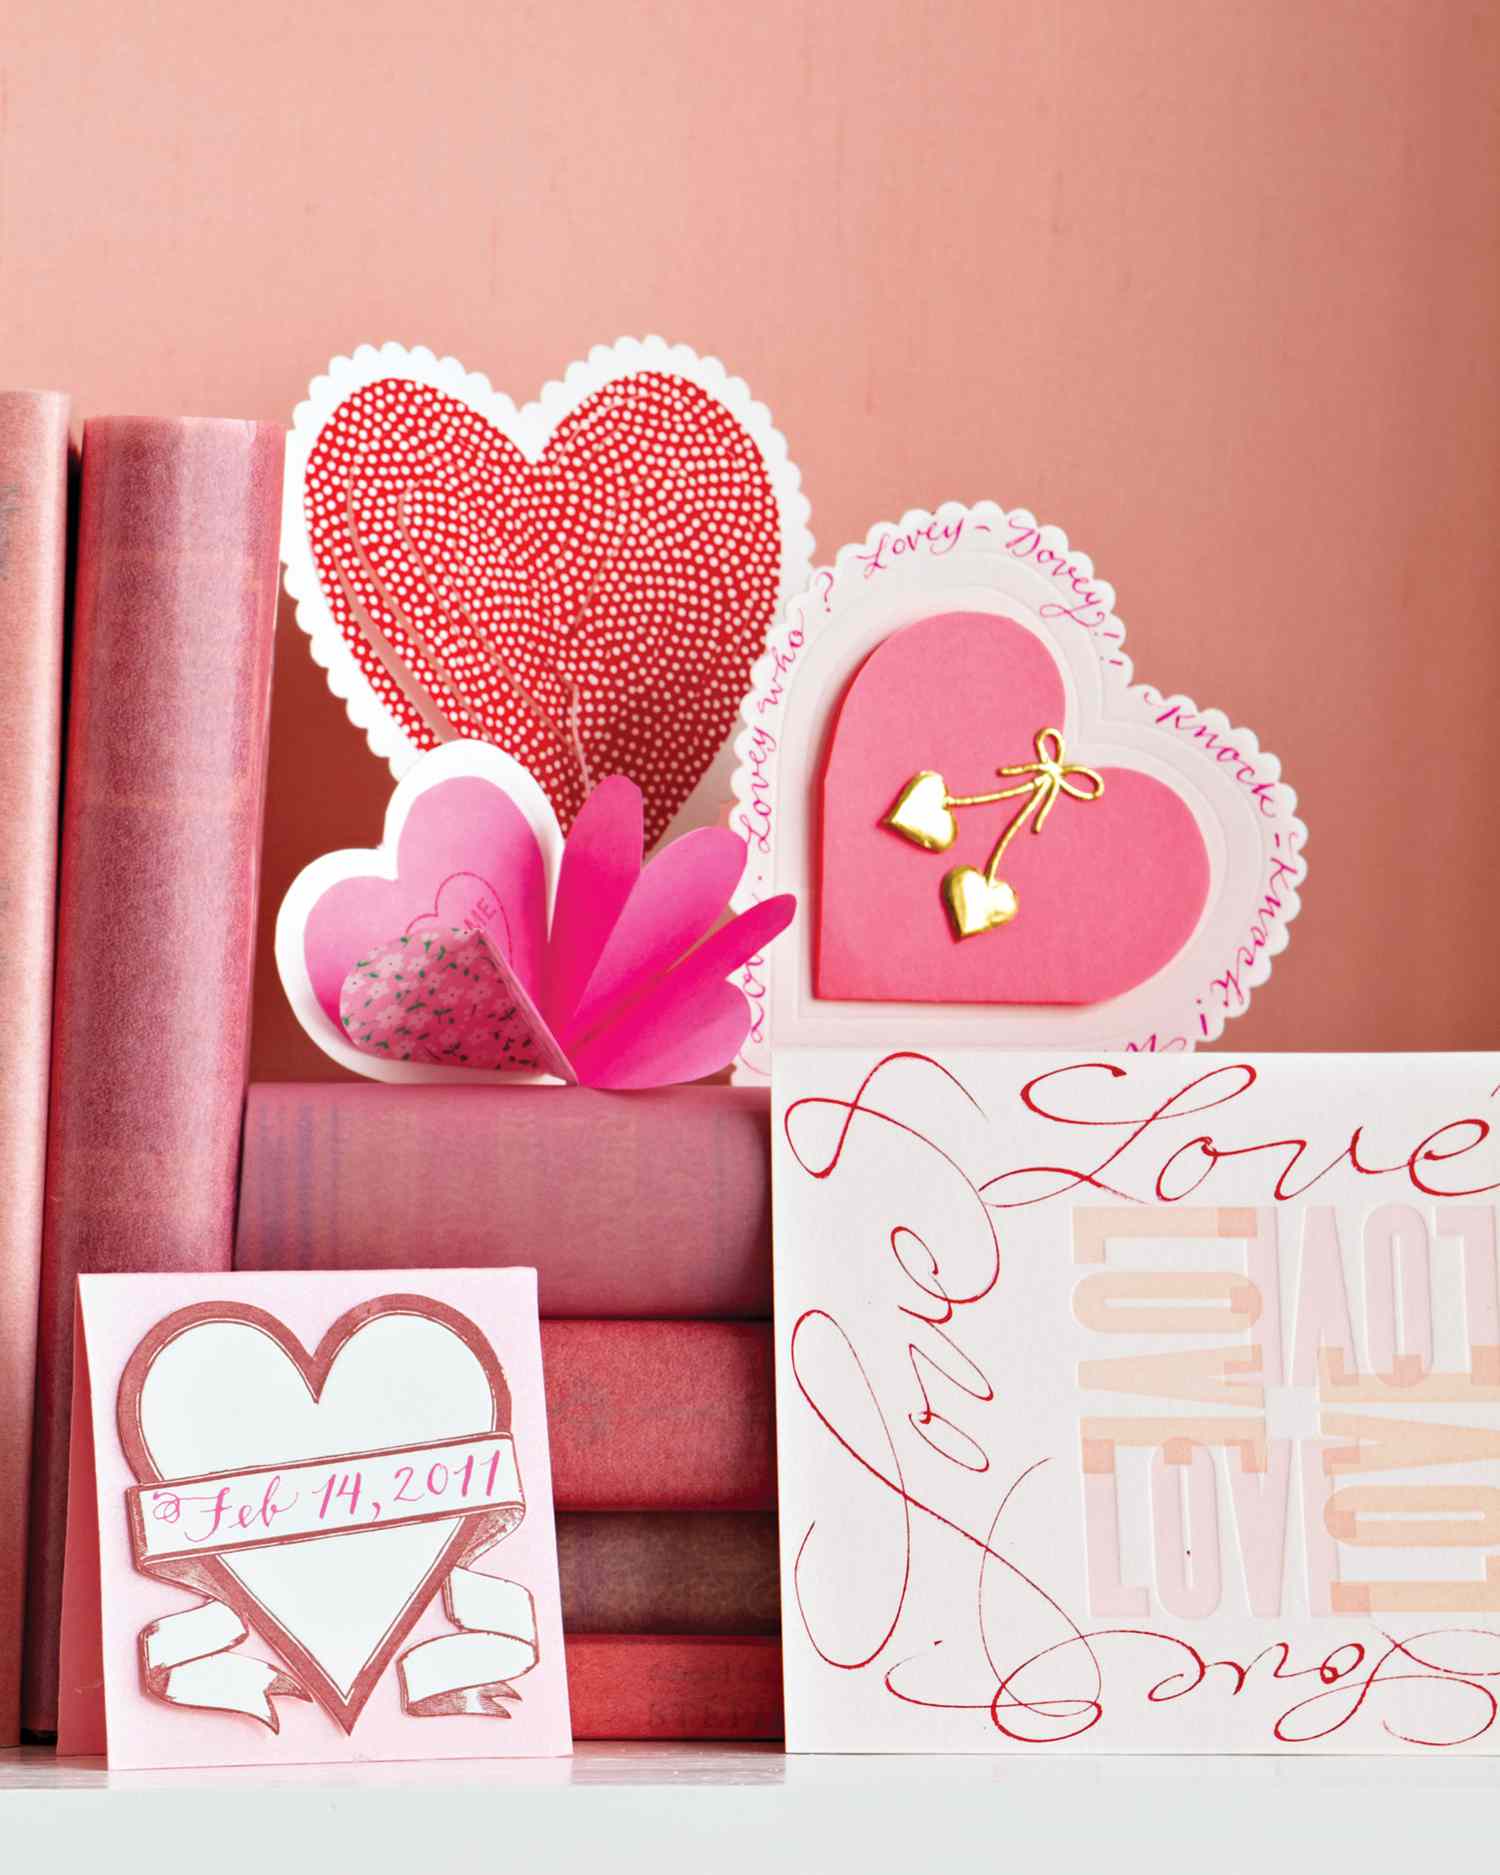 Key To My Heart Romantic Personalised Valentine's Greetings Card 